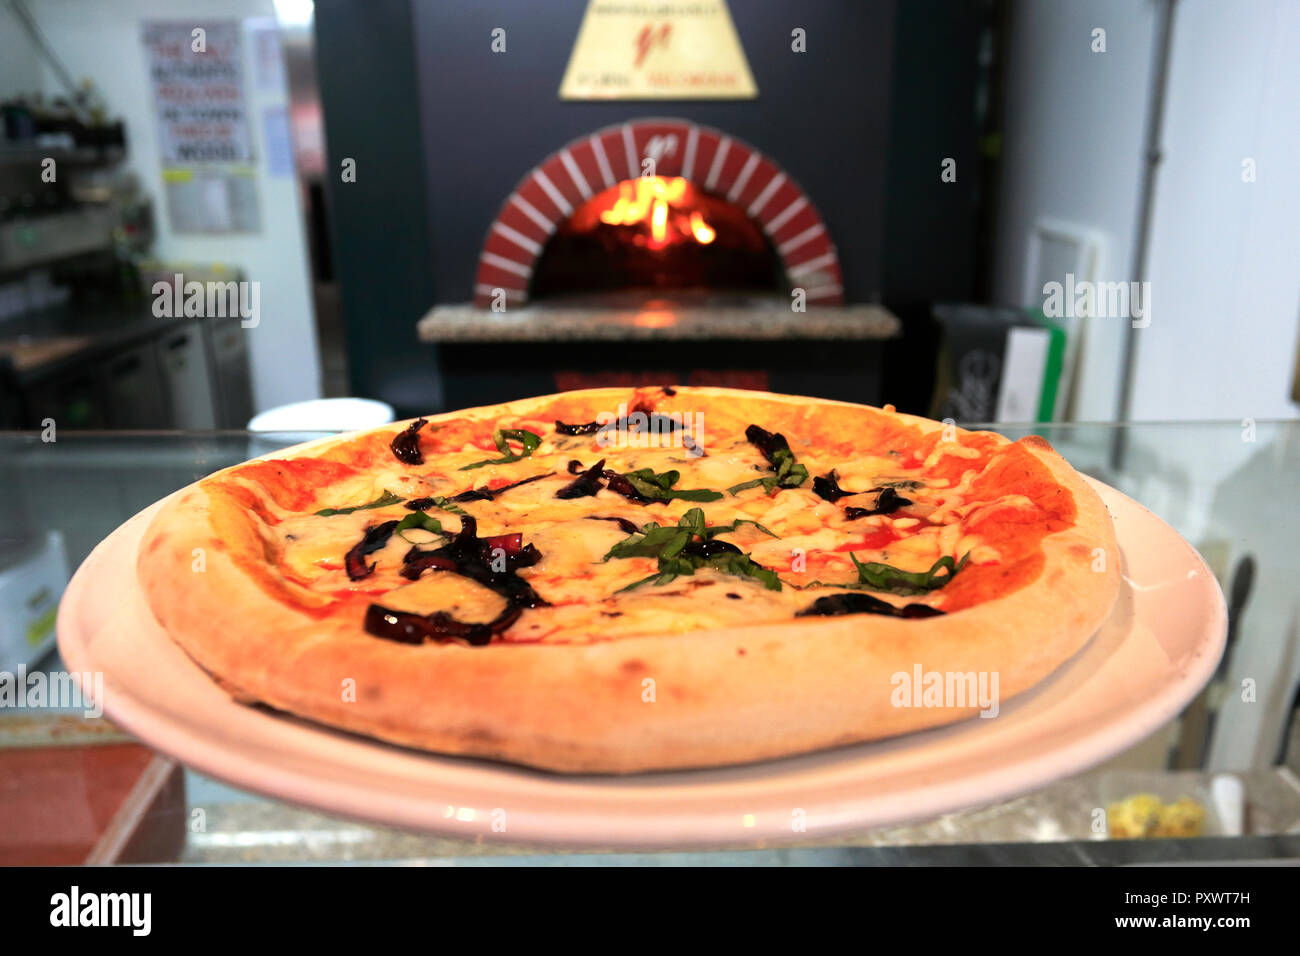 ham, mushrooms, black olives & artichokes Pizza, cooked in a traditional wood fired pizza oven Stock Photo